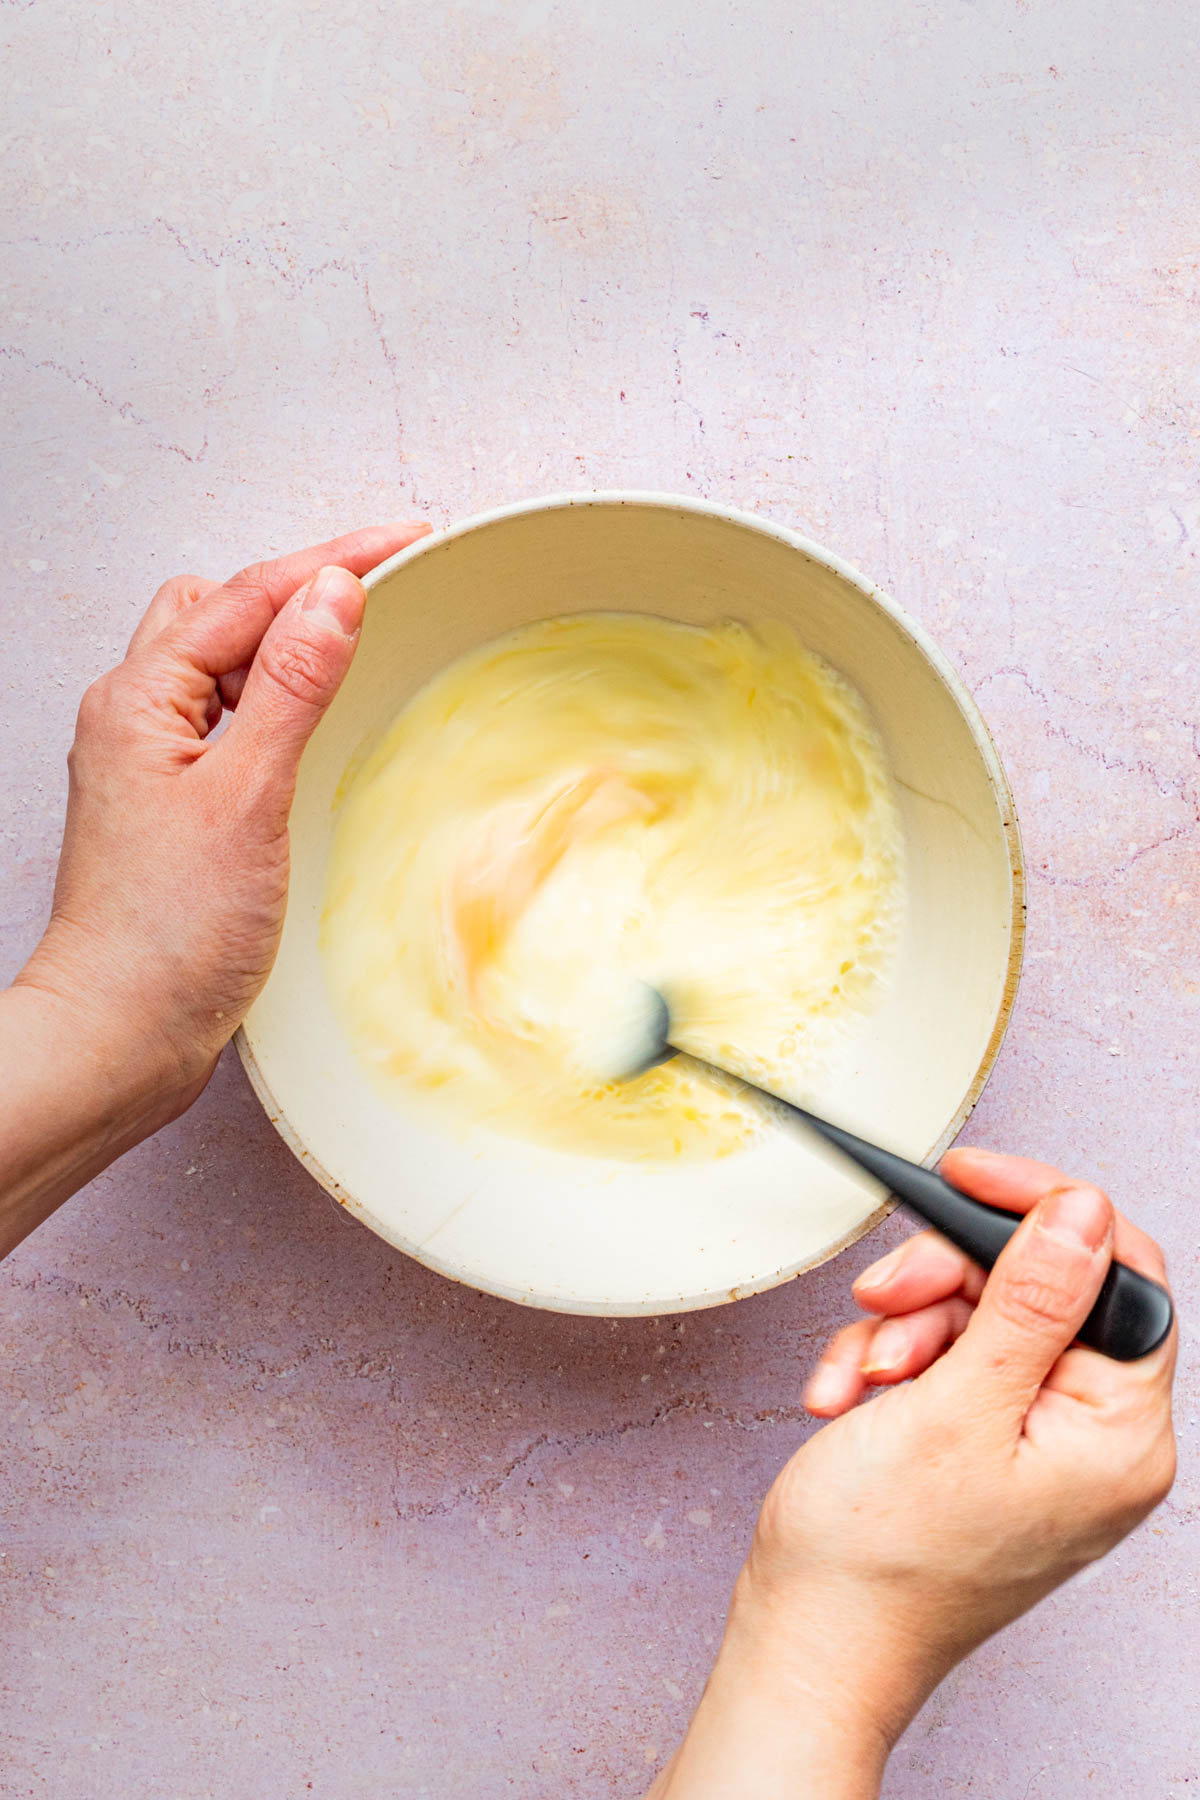 Mixing wet ingredients in a small bowl.